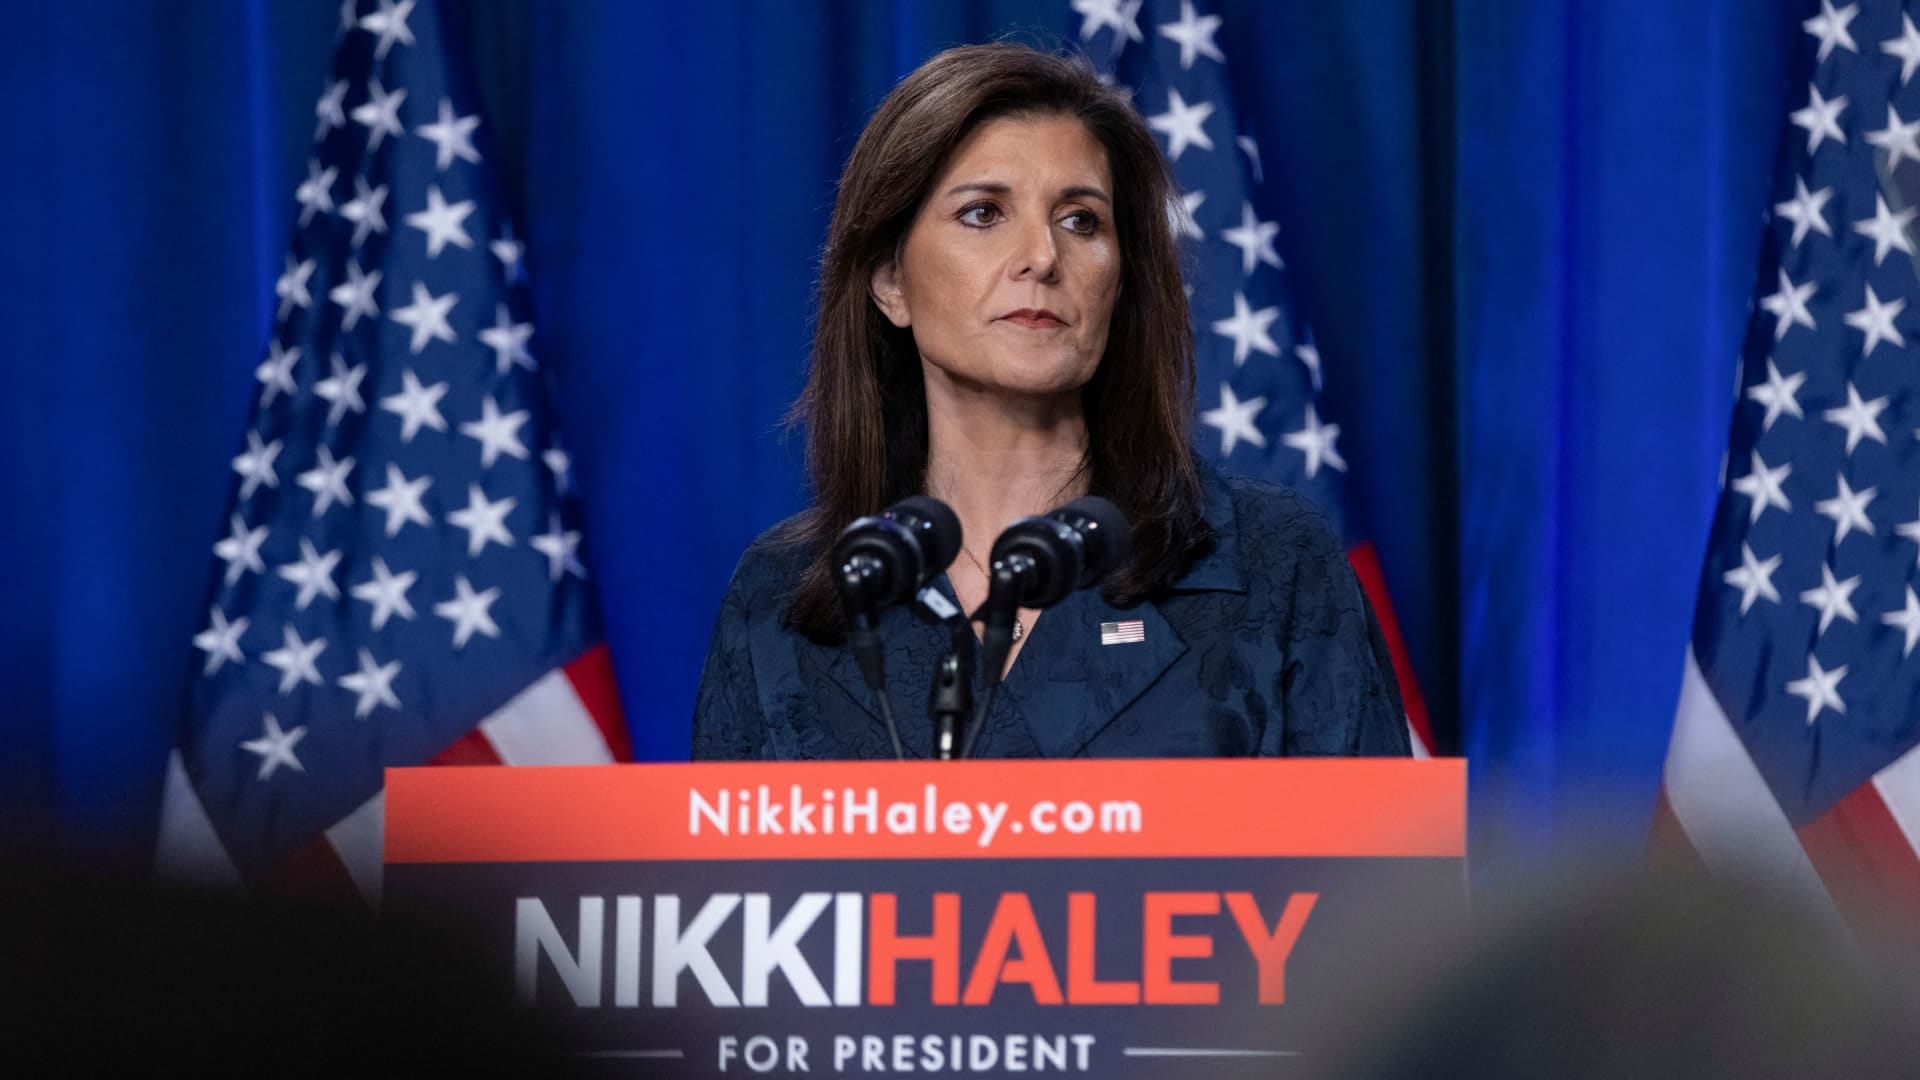 Nikki Haley to Suspend 2024 Presidential Campaign, Clearing Path for Trump